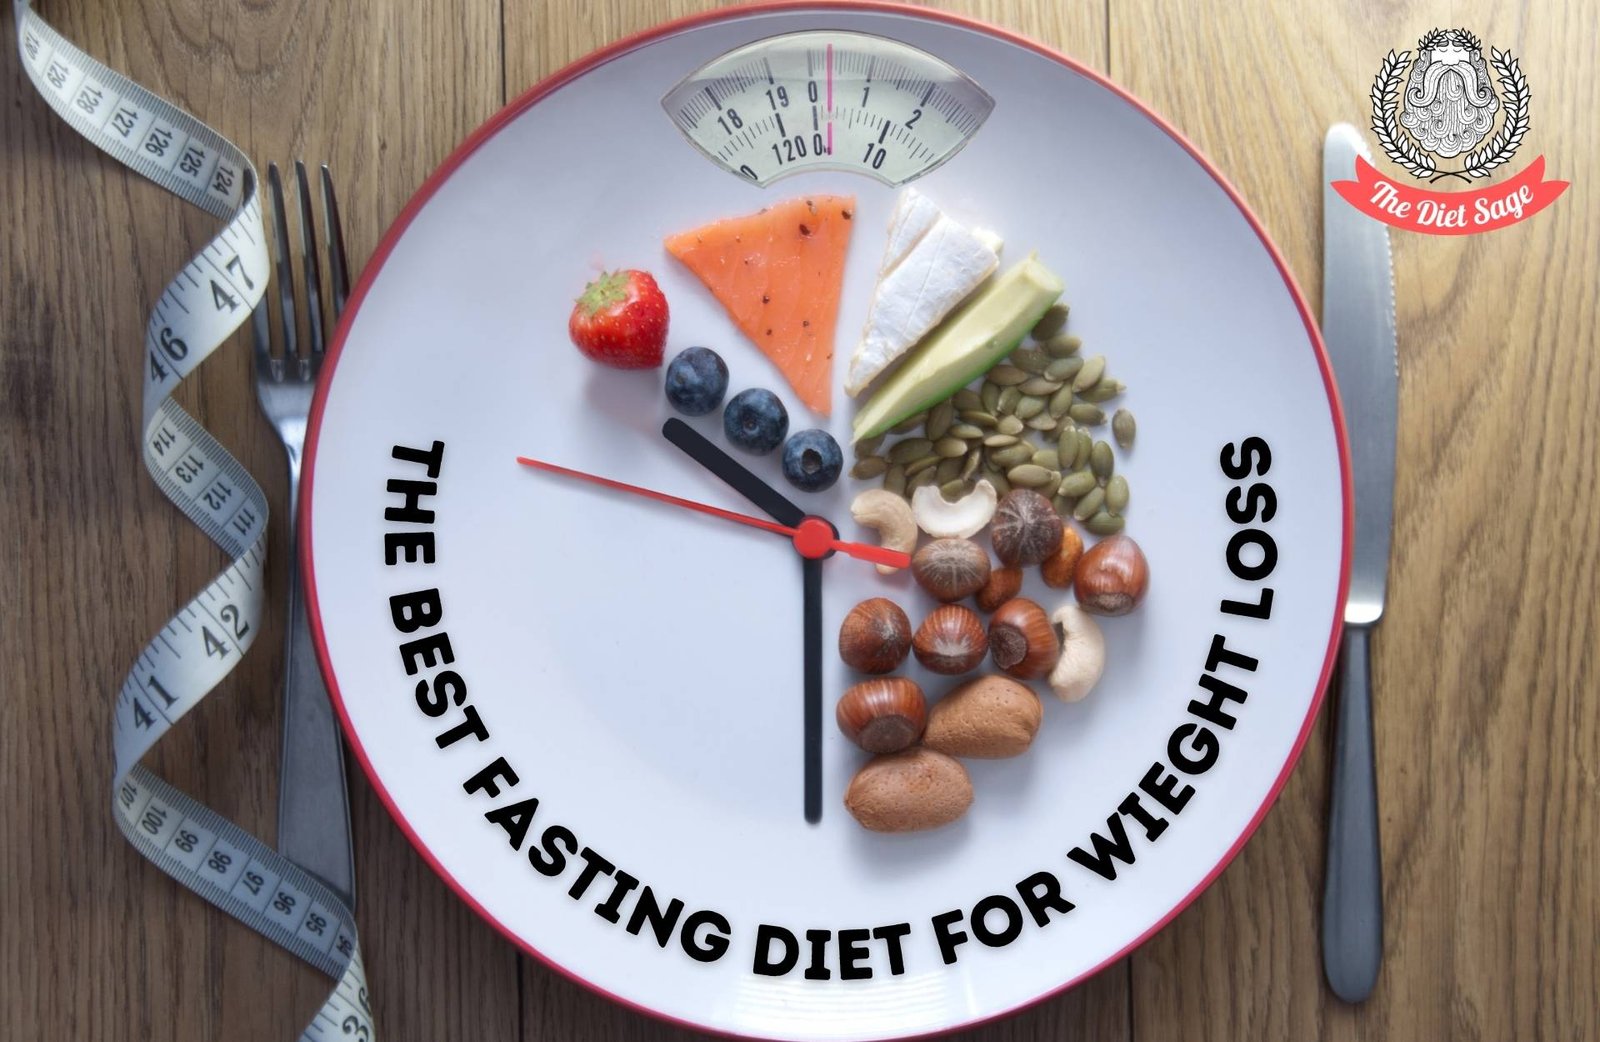 best fasting diet for weight loss